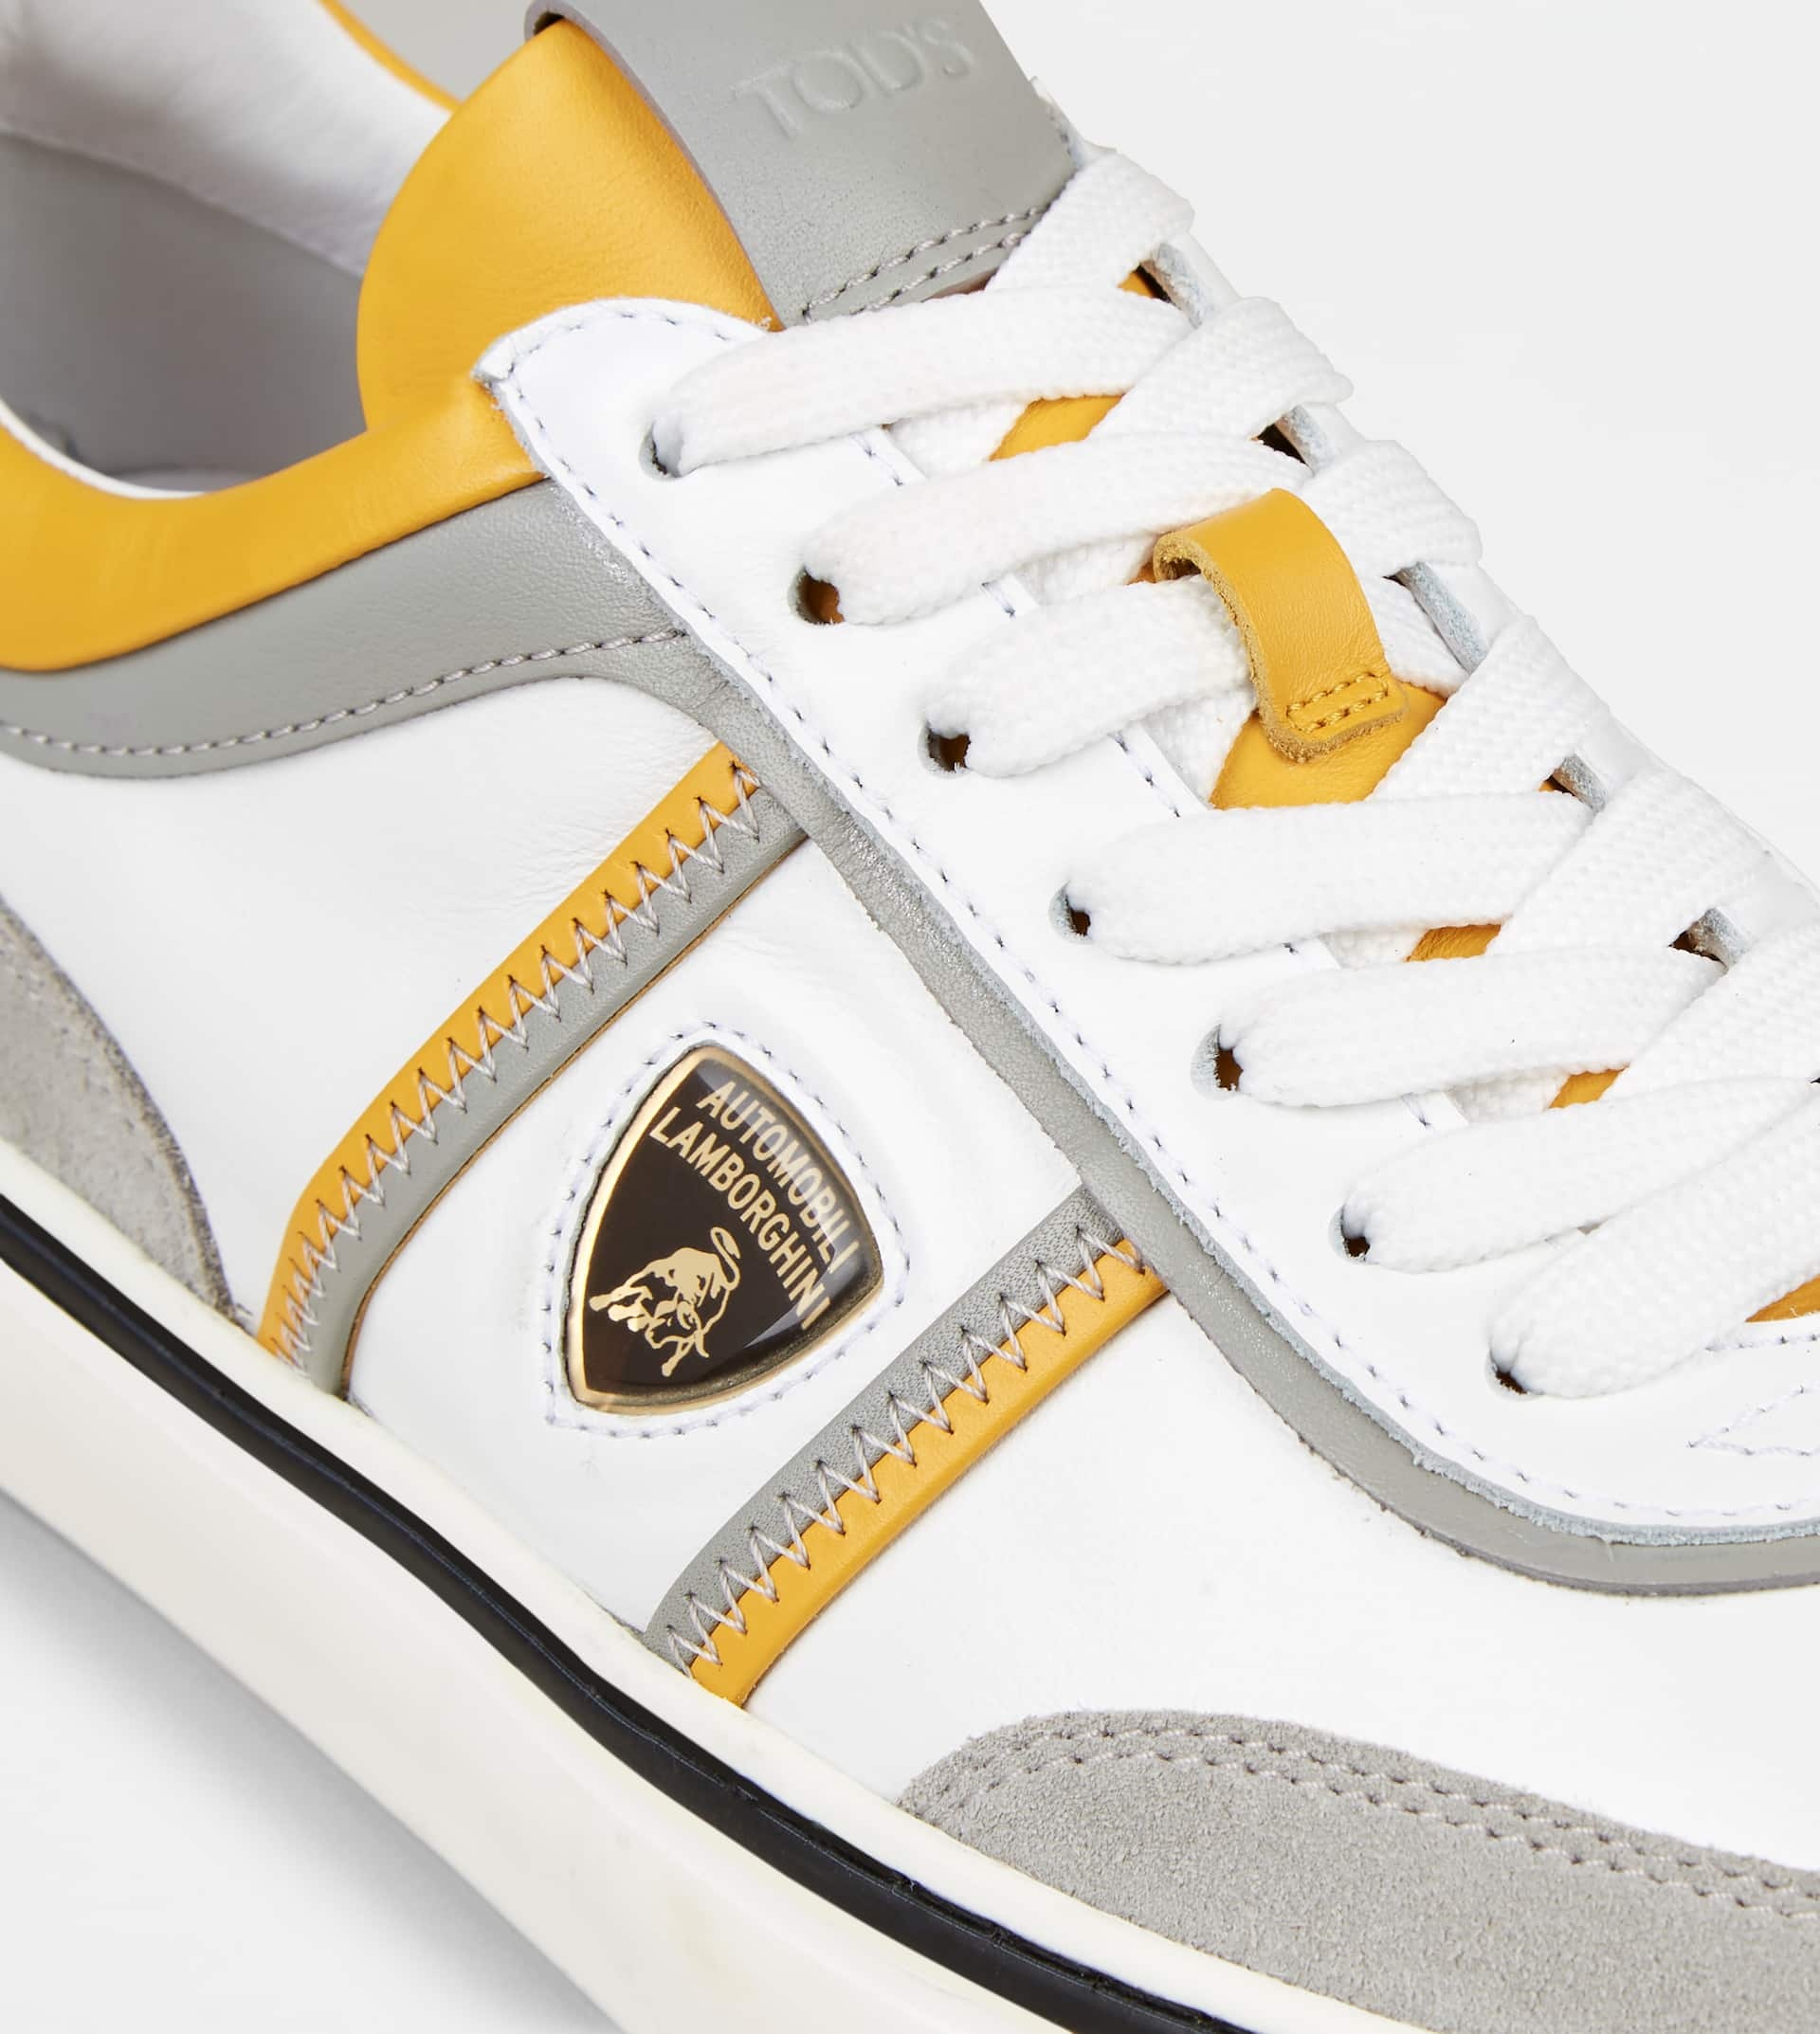 SNEAKERS IN LEATHER - GREY, WHITE, YELLOW - 6